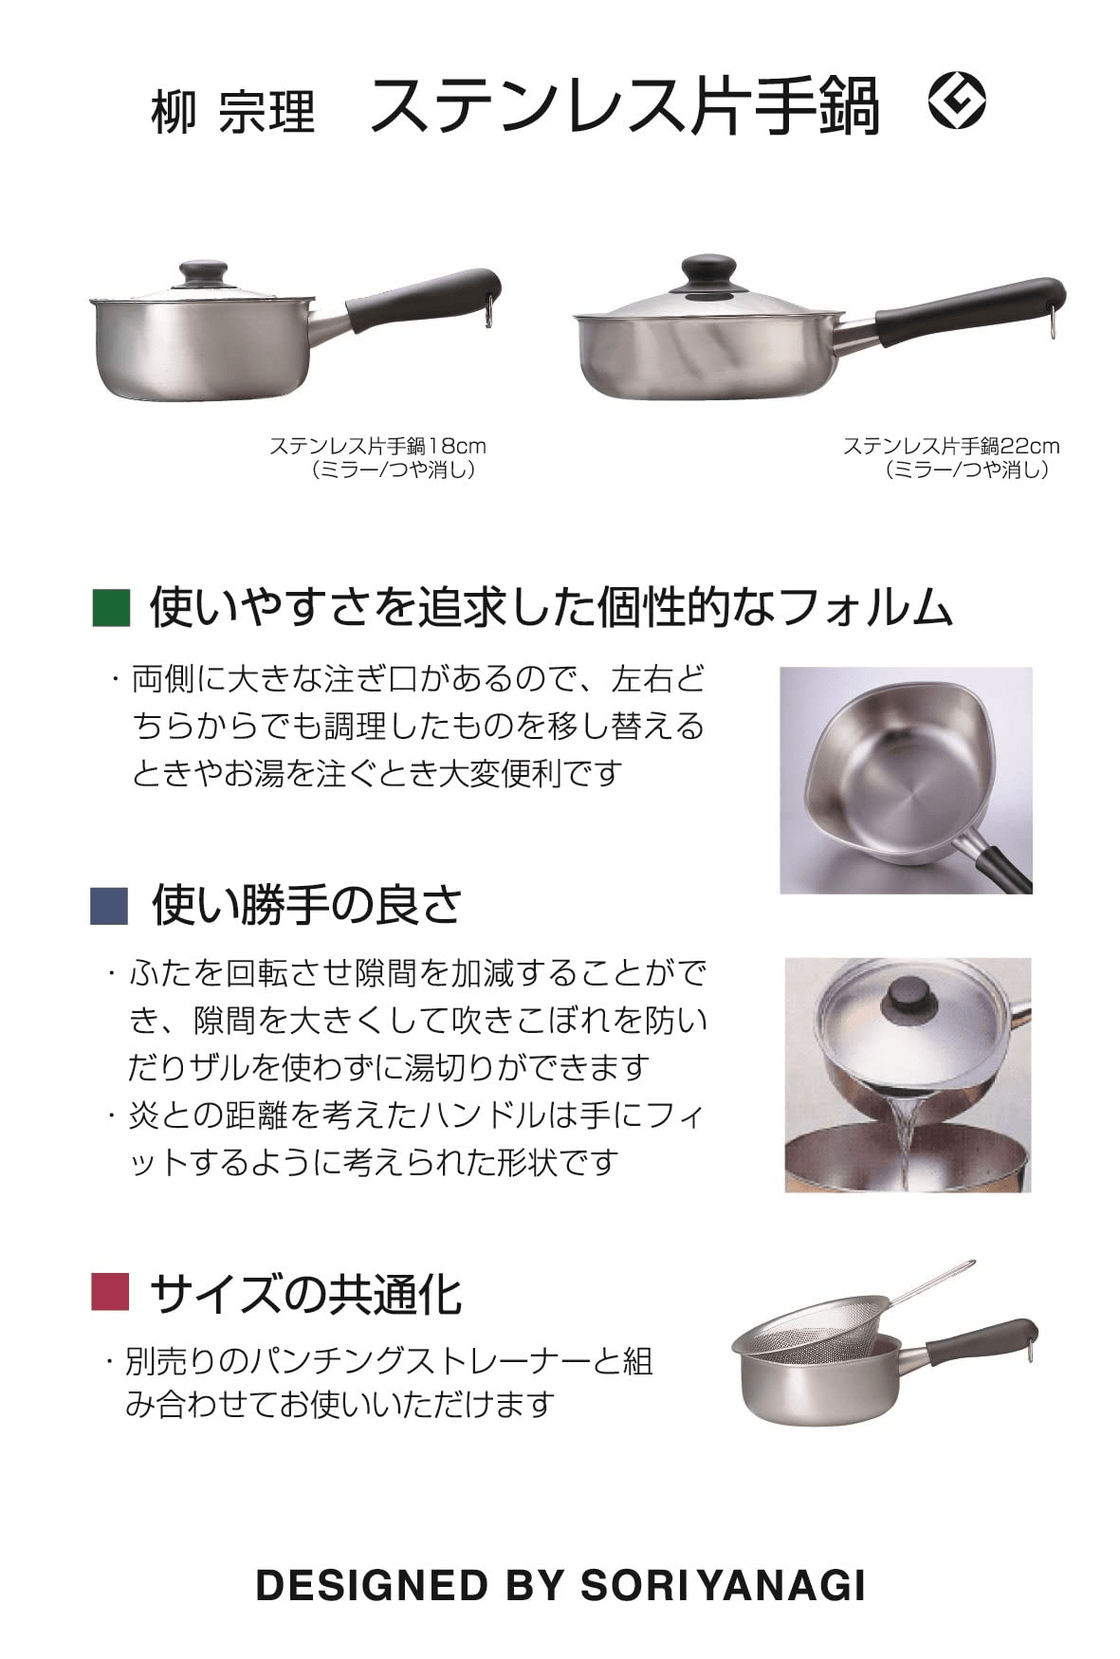 A Yukihira pot without a handle? How to use Japanese functional